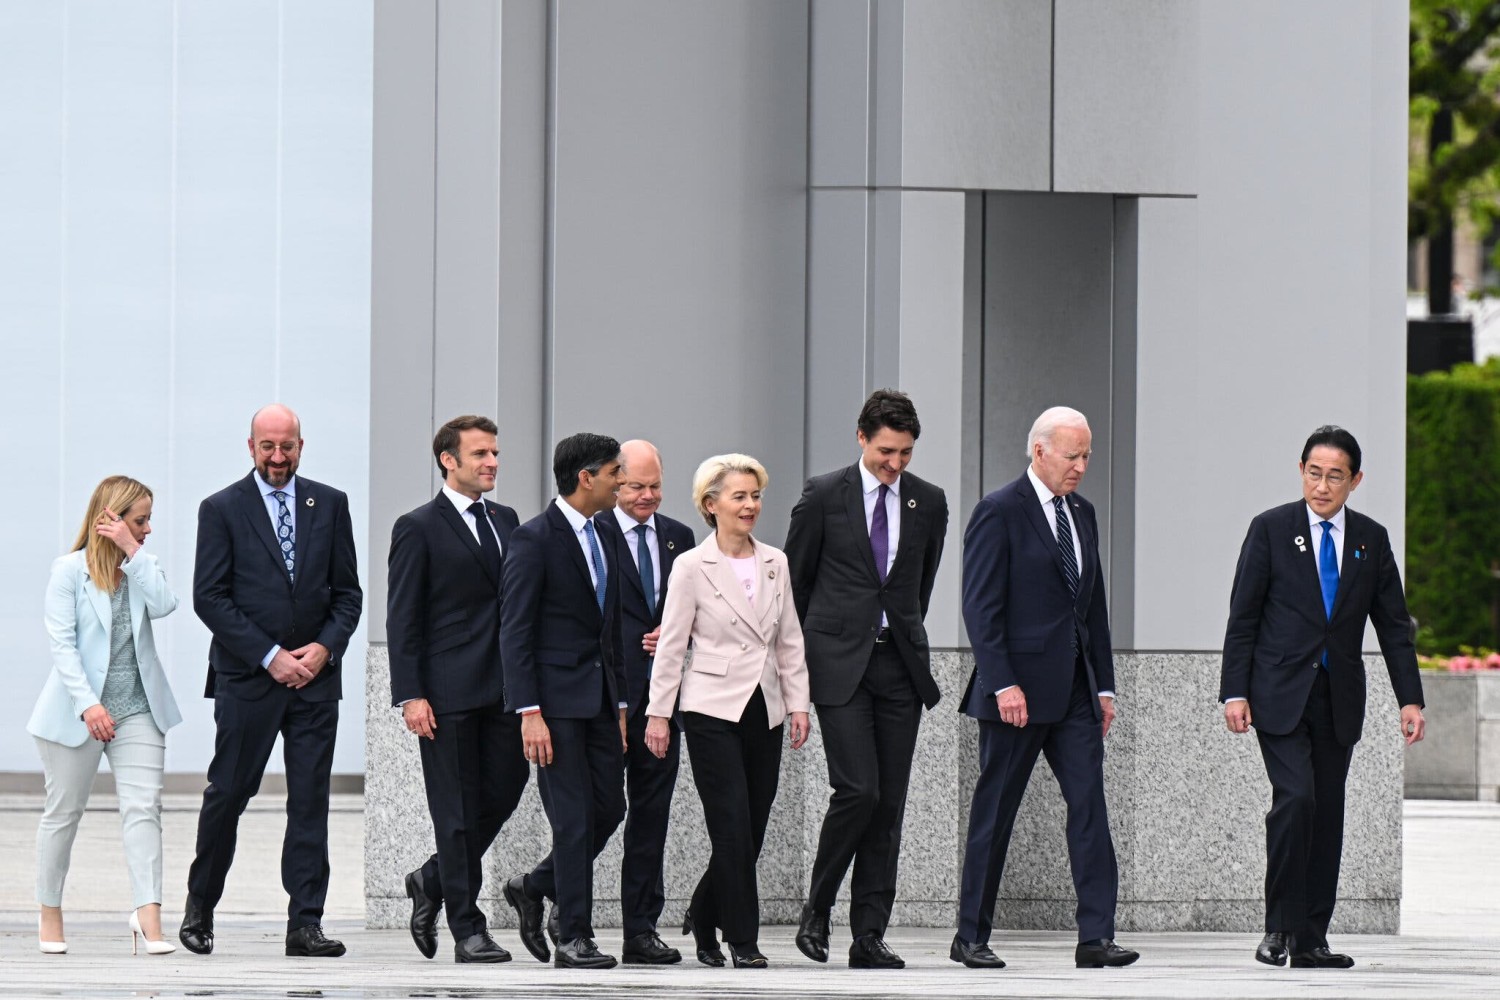 World leaders at last year’s G7 meeting, in Hiroshima, Japan.Credit...Kenny Holston/The New York Times